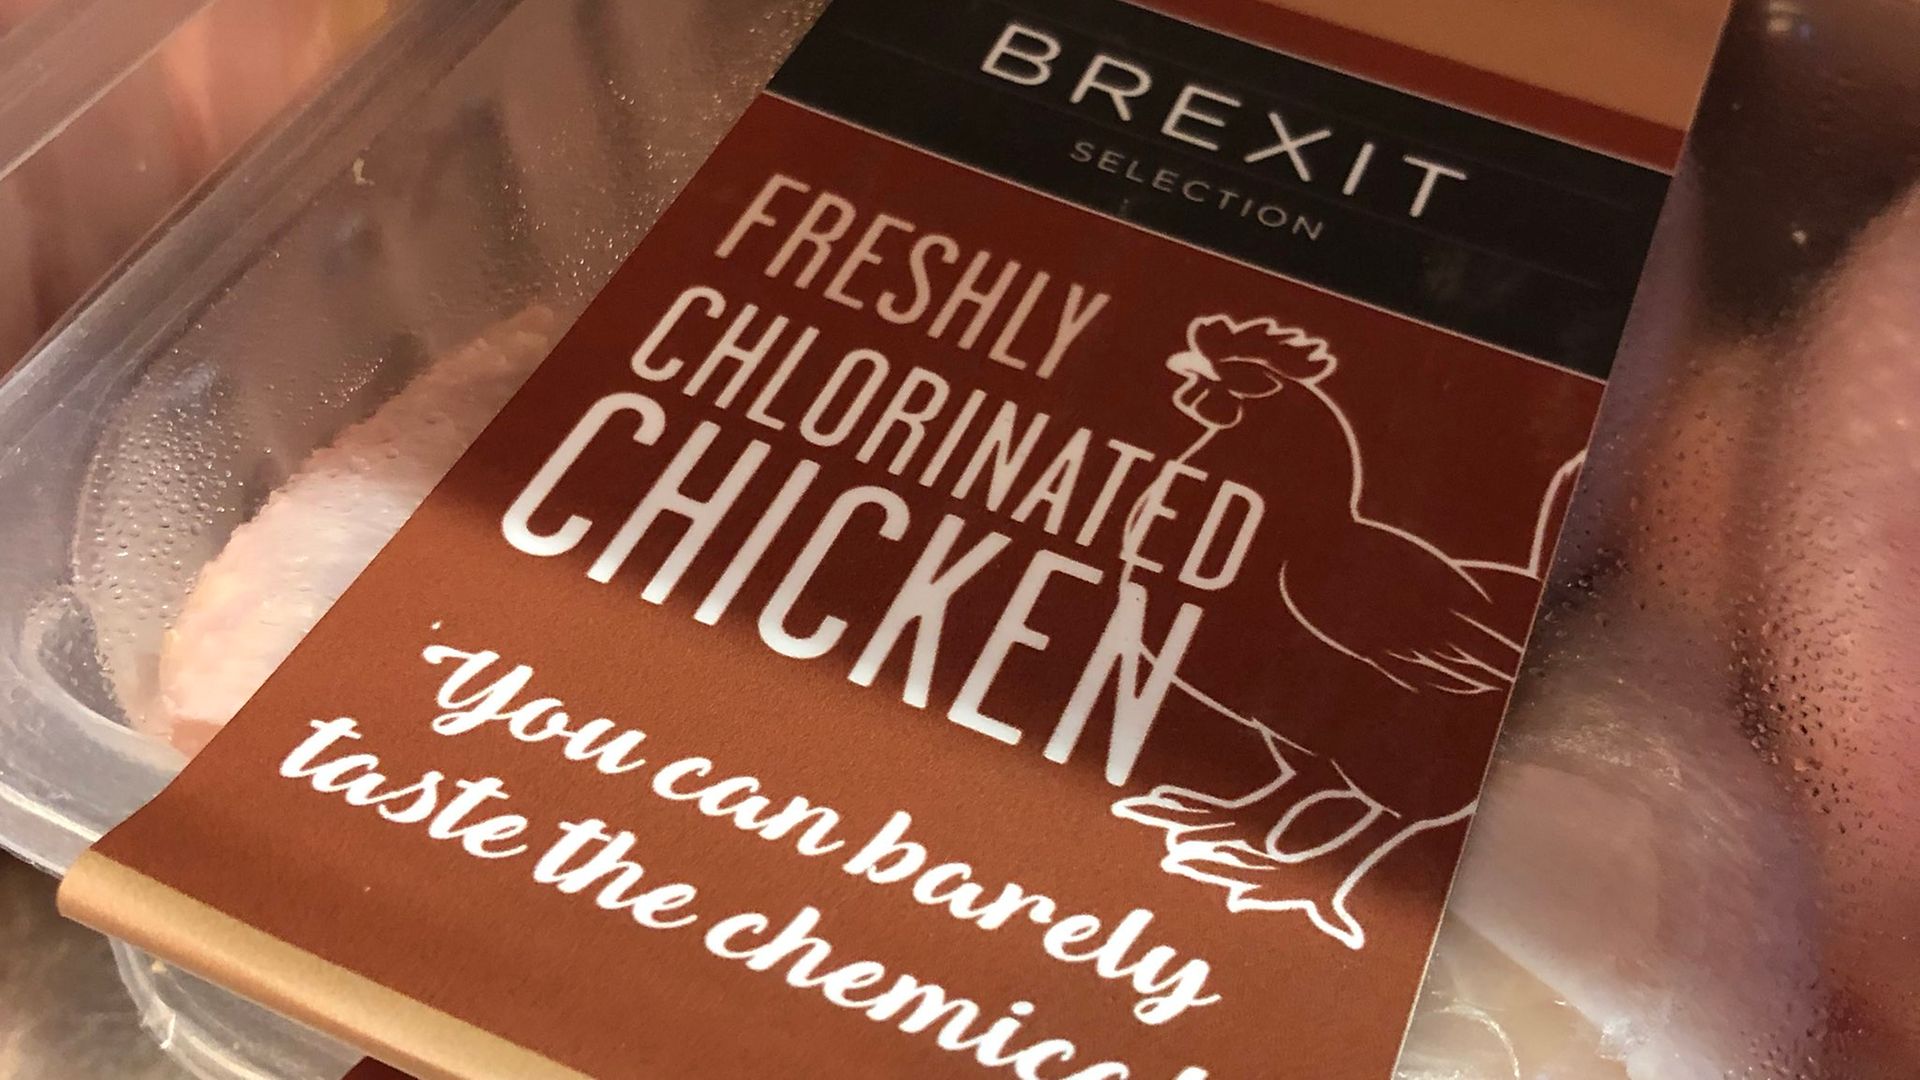 Freshly chlorinated chicken is advertised by the People's Vote campaign in an anti-Brexit campaign. - Credit: Twitter